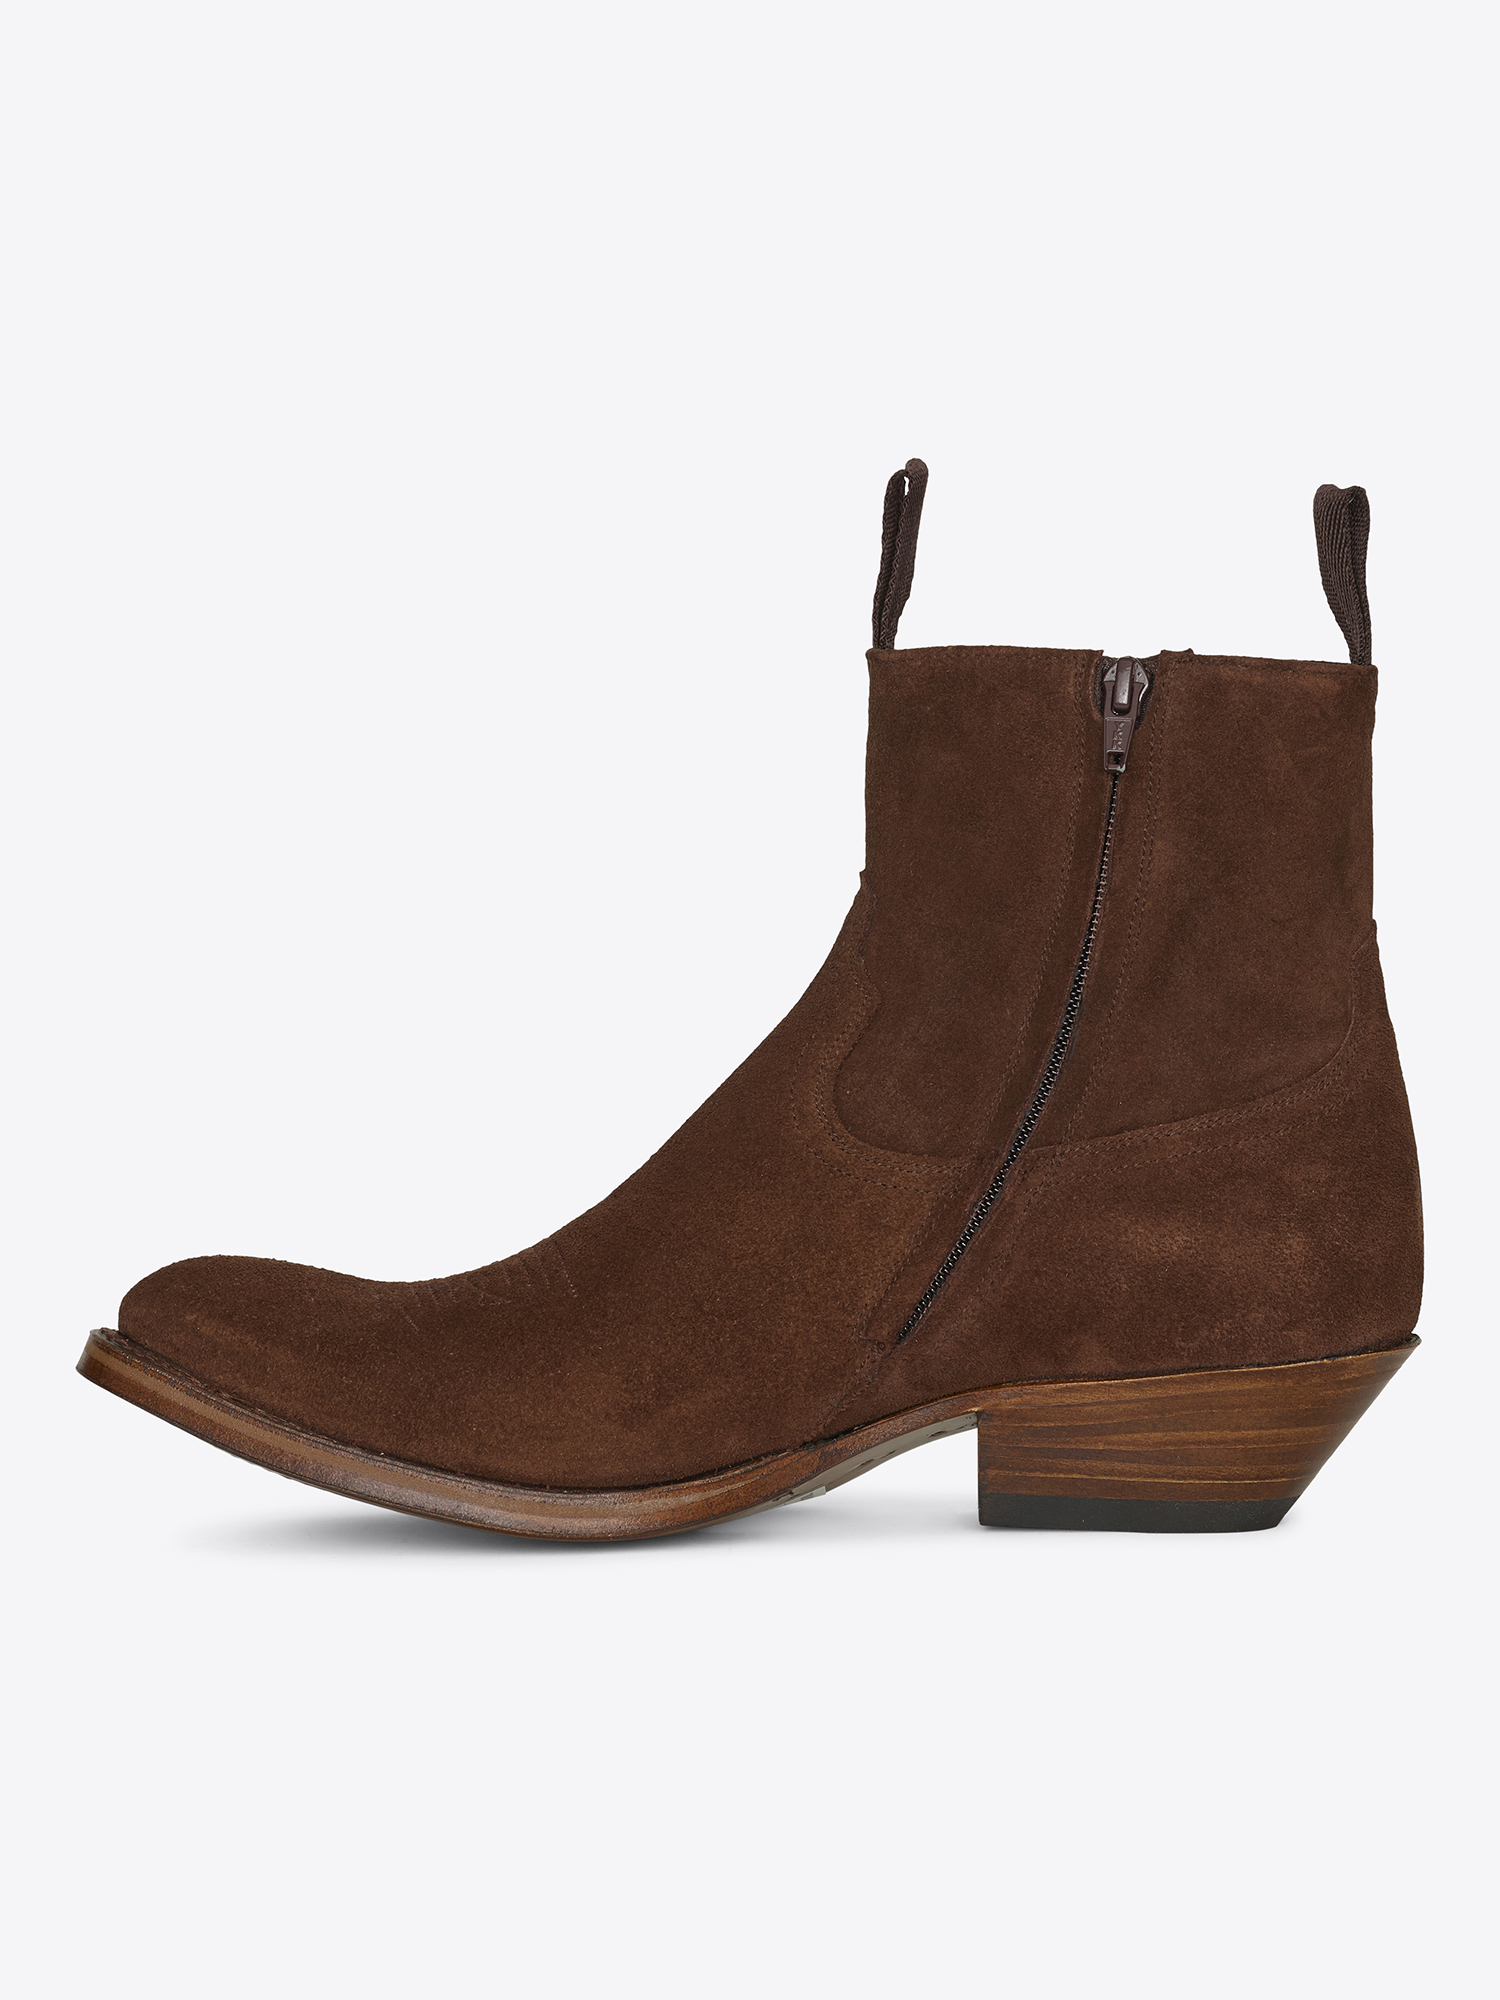 Western ankle boots in brown suede